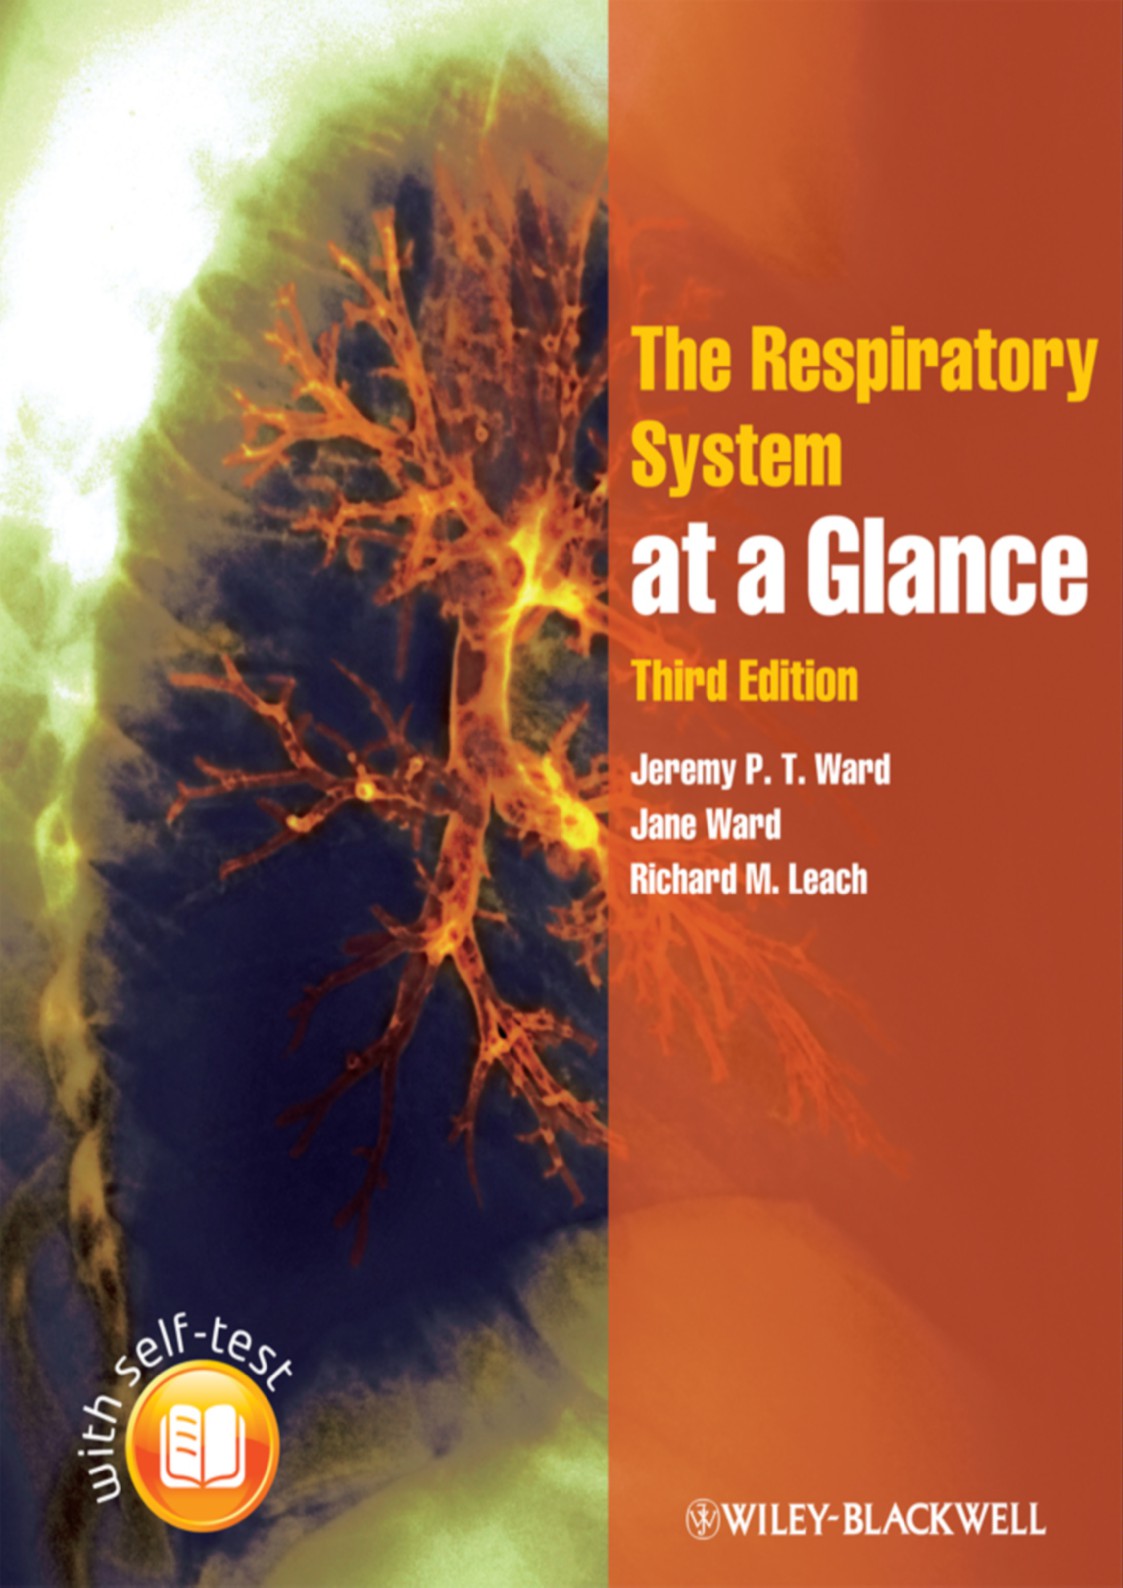 The Respiratory System at a Glance, 3rd Edition